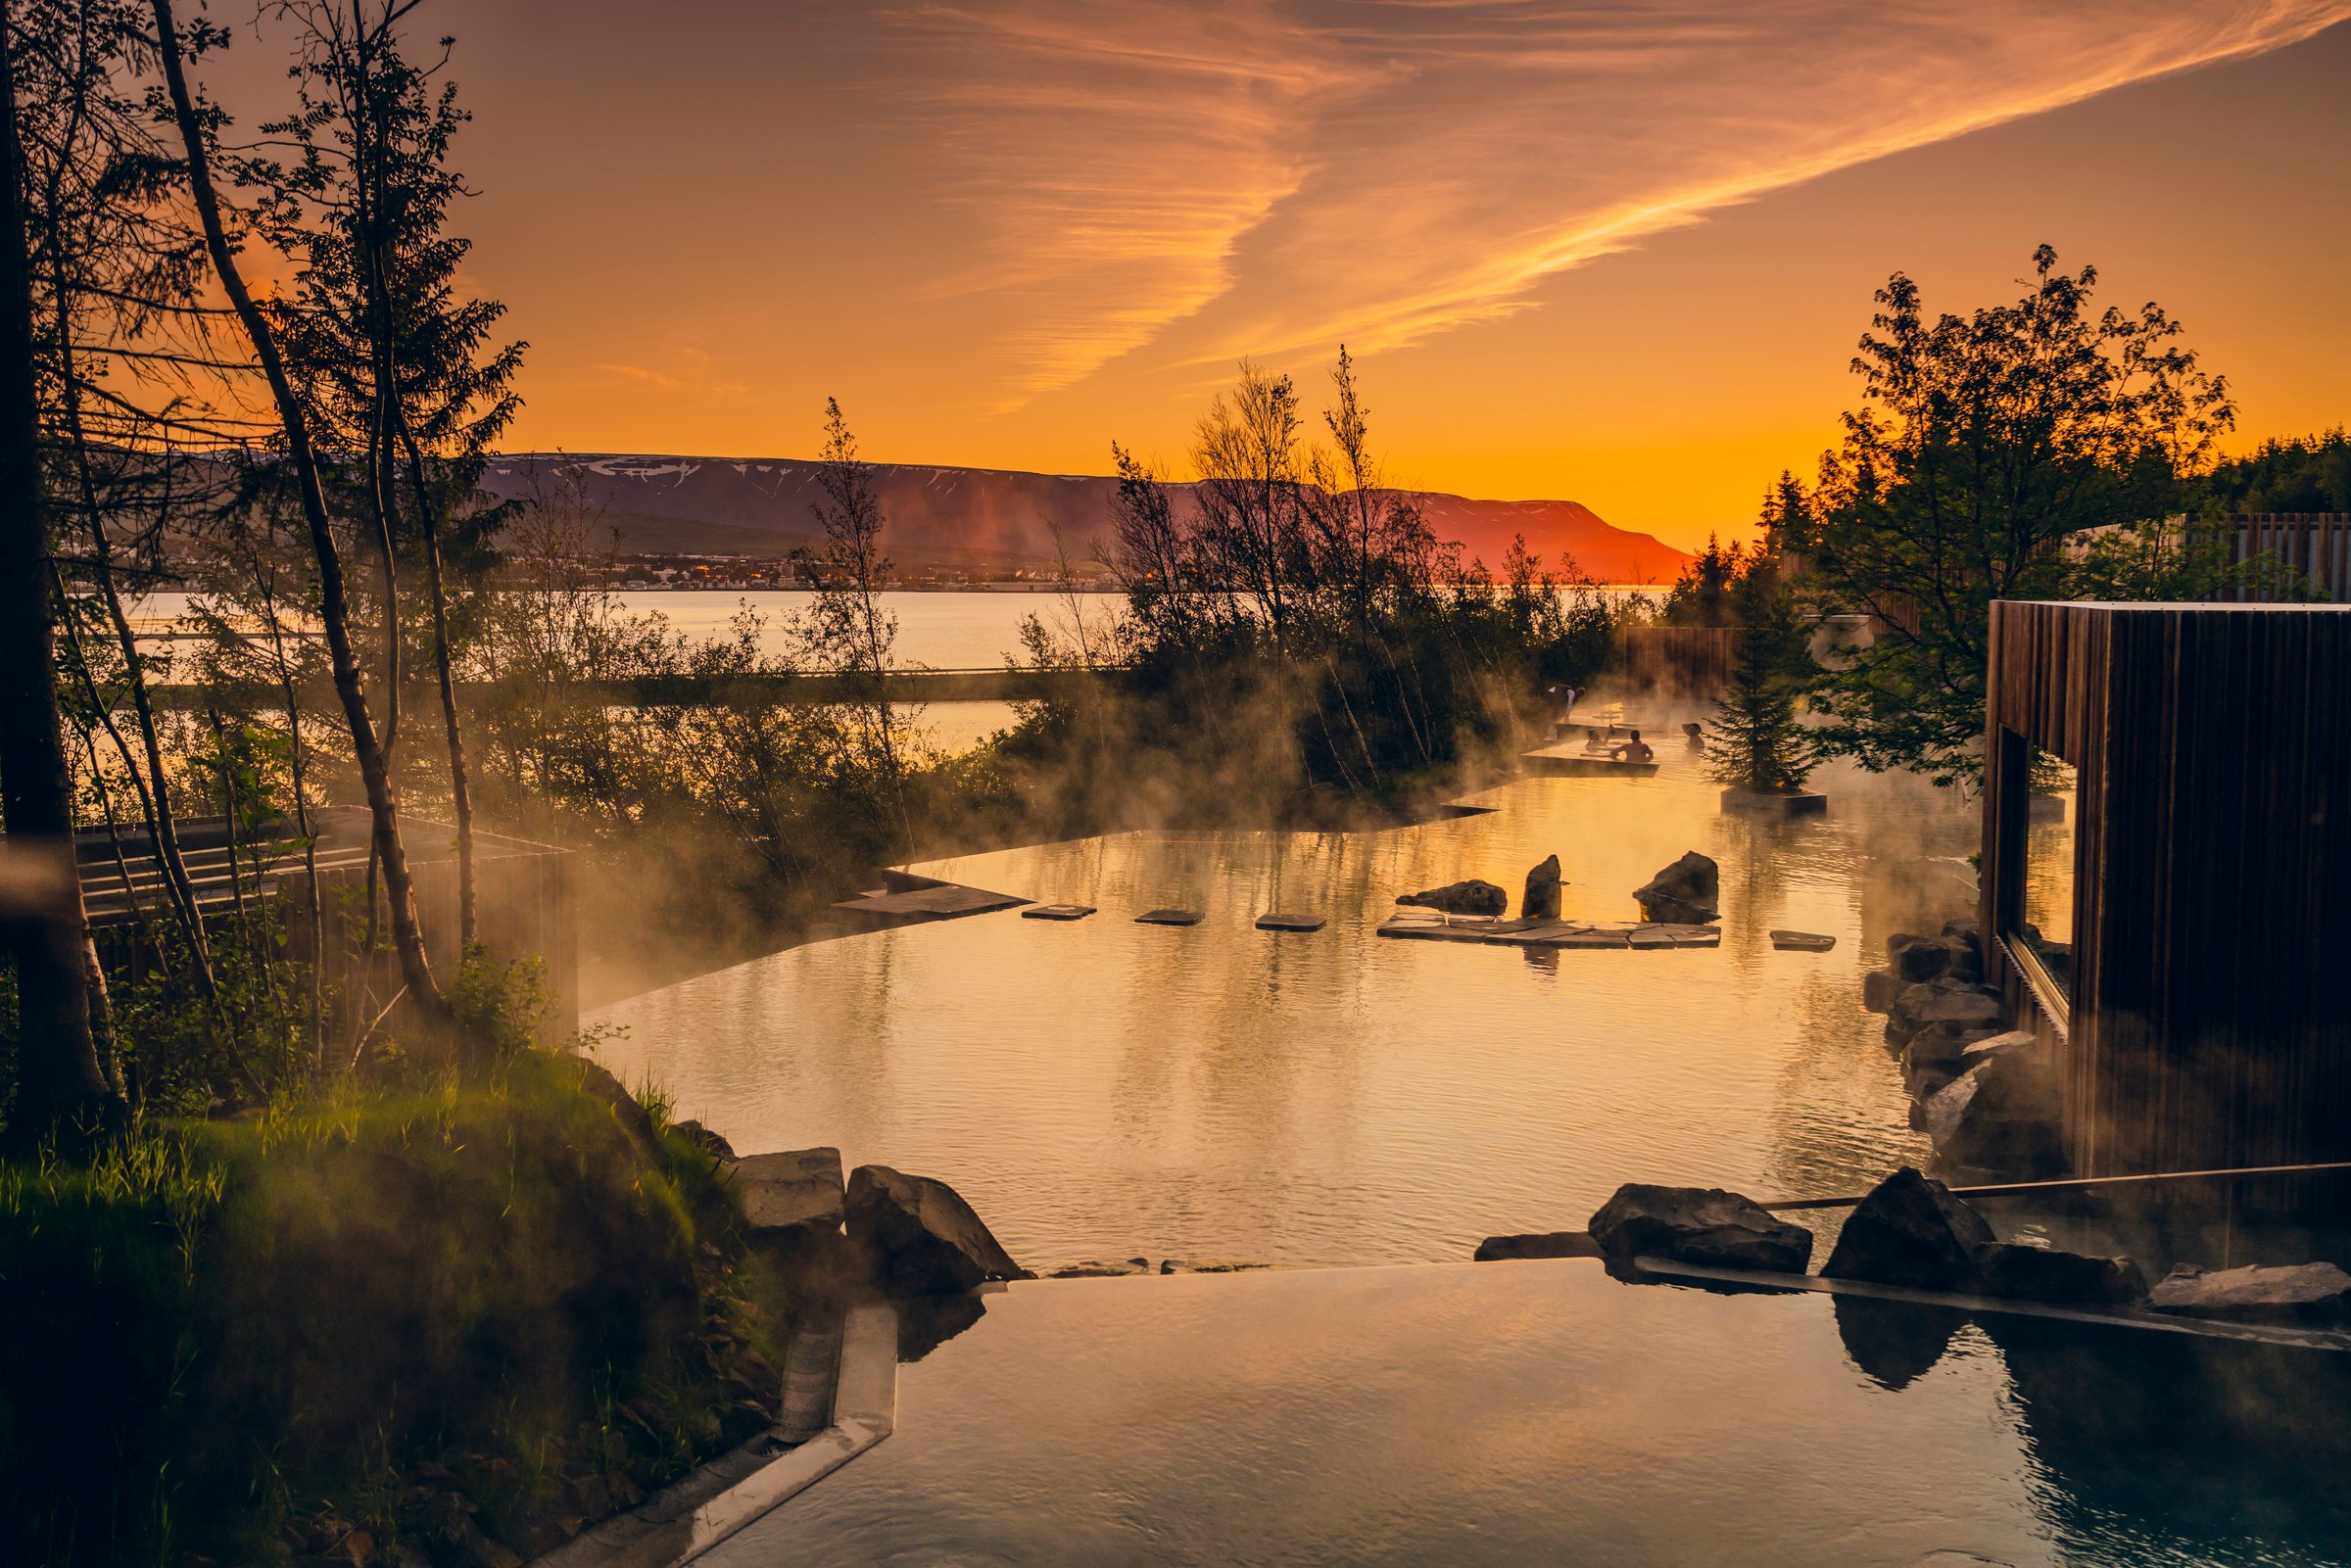 The Forest Lagoon geothermal baths: a warm pool set amid trees, with a view of sunset over Eyjafjörður